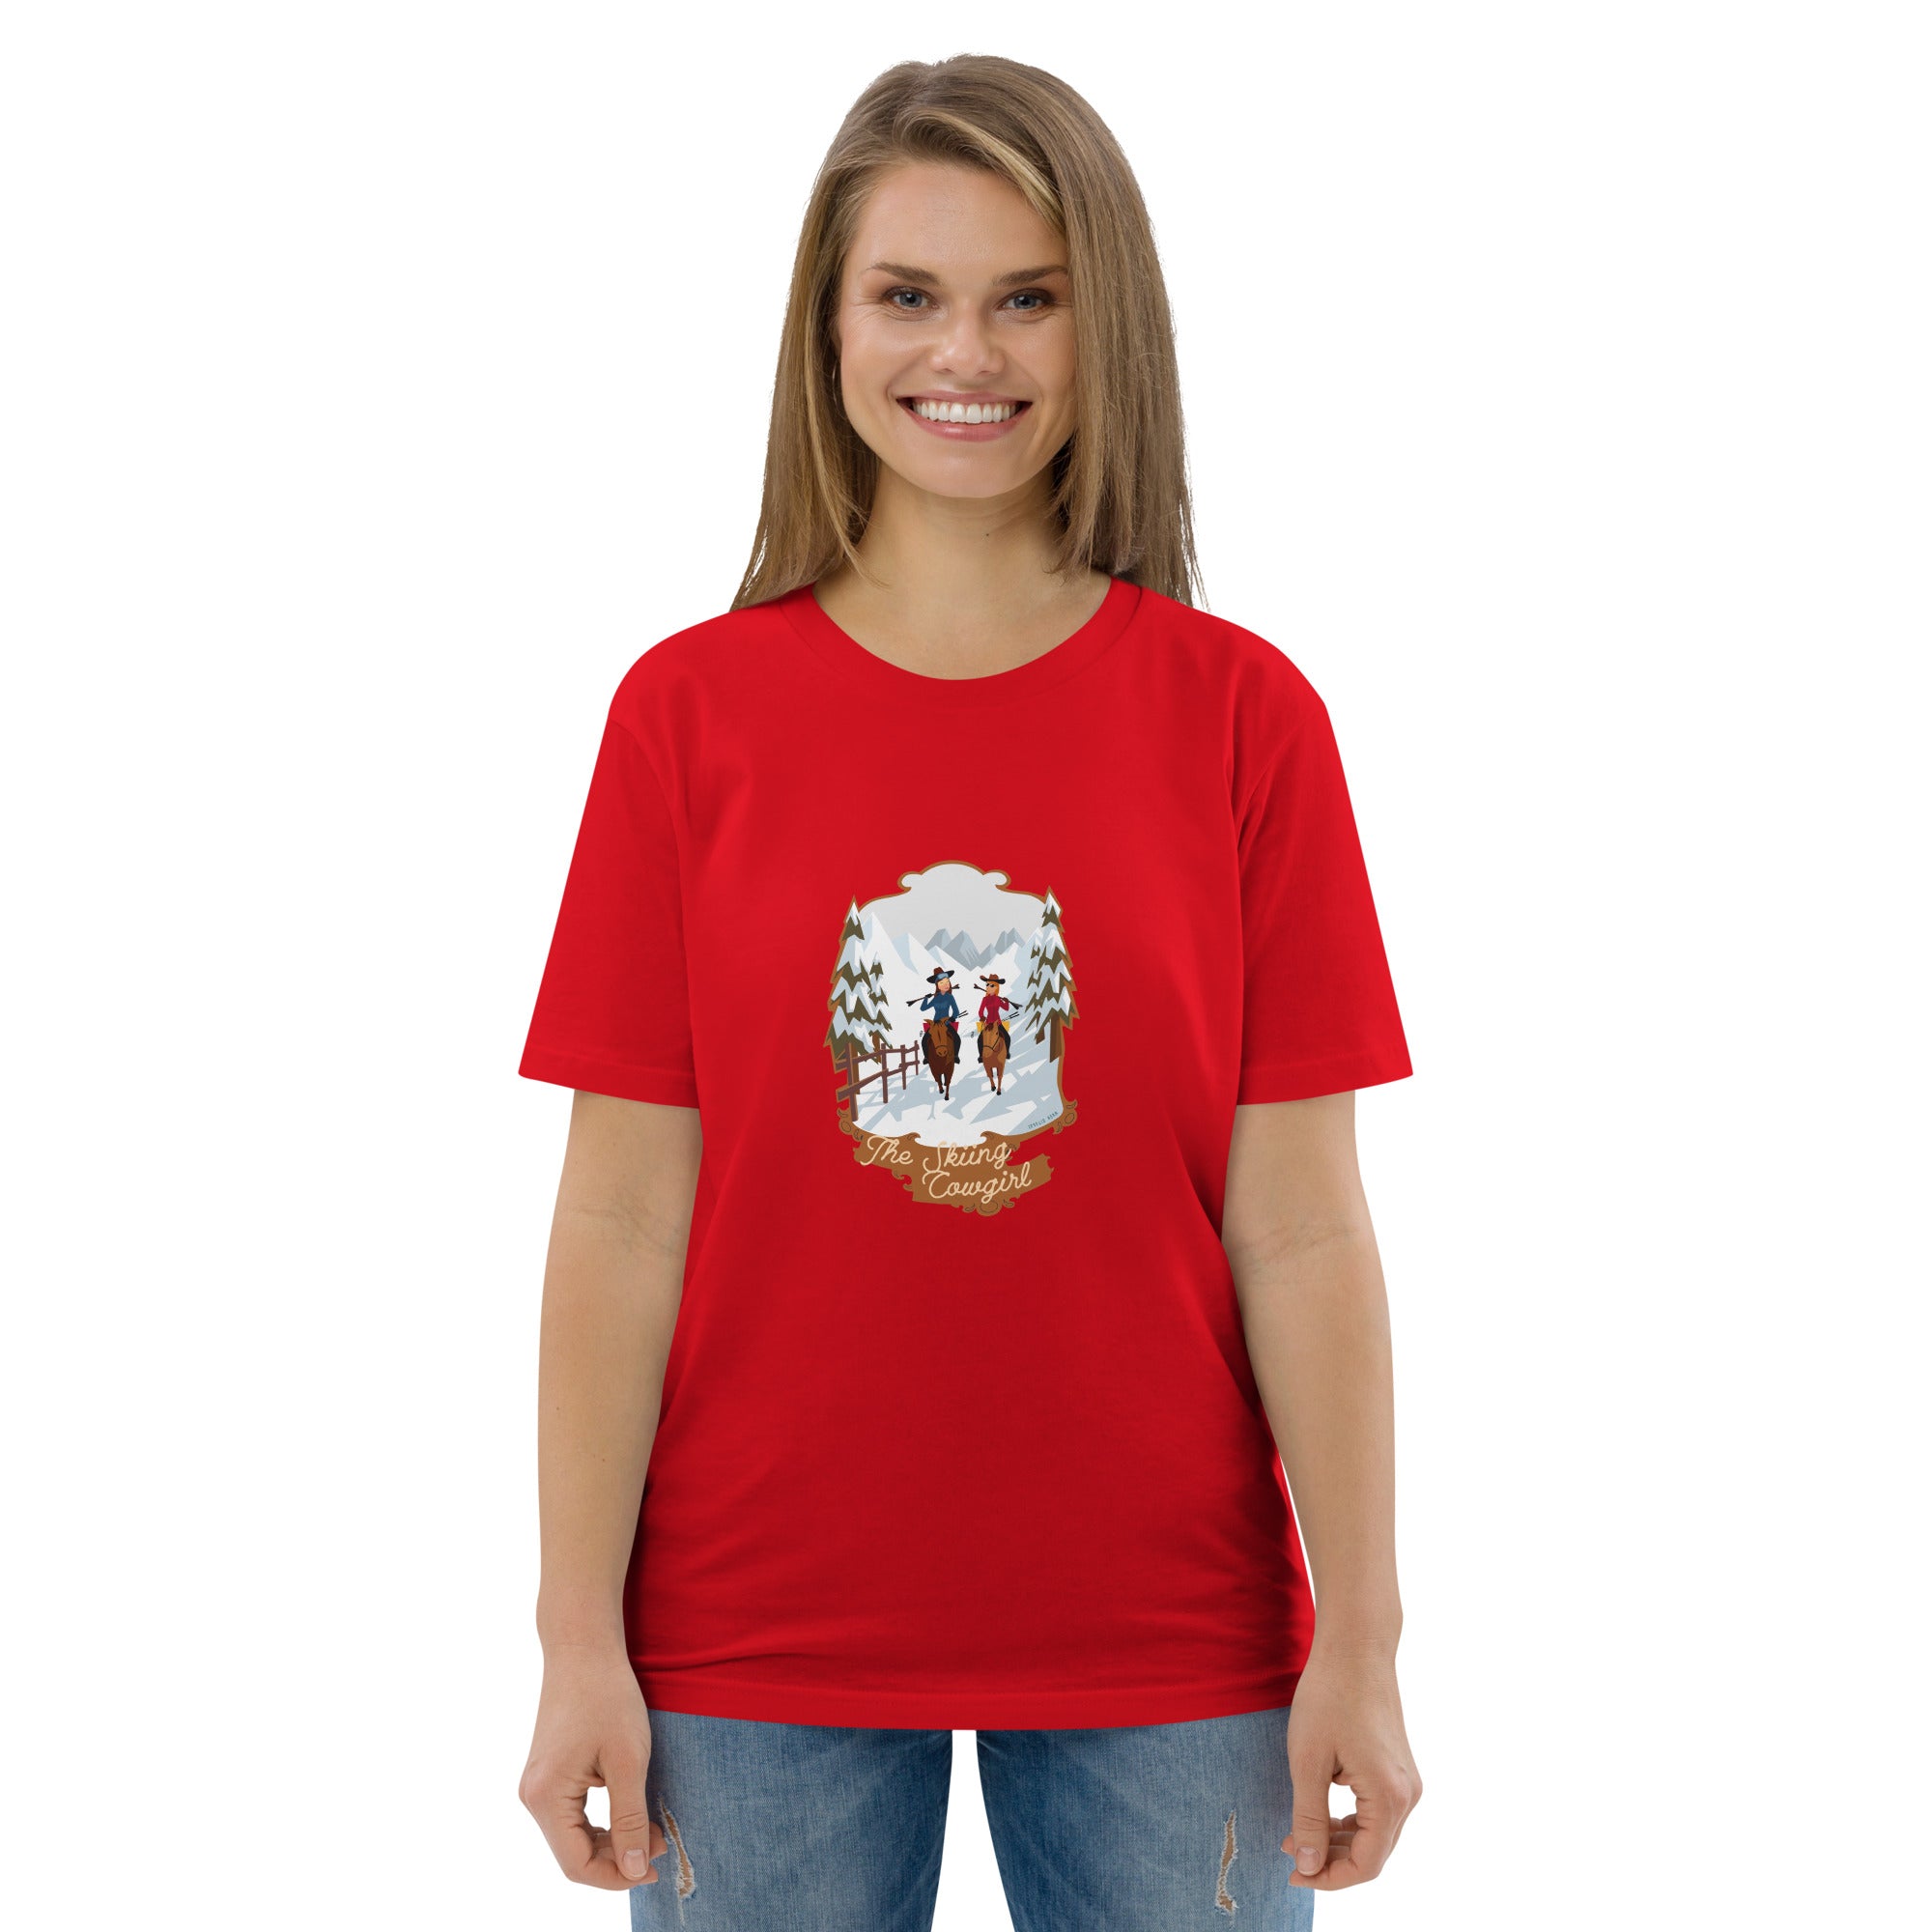 Unisex organic cotton t-shirt The Skiing Cowgirl on bright colors